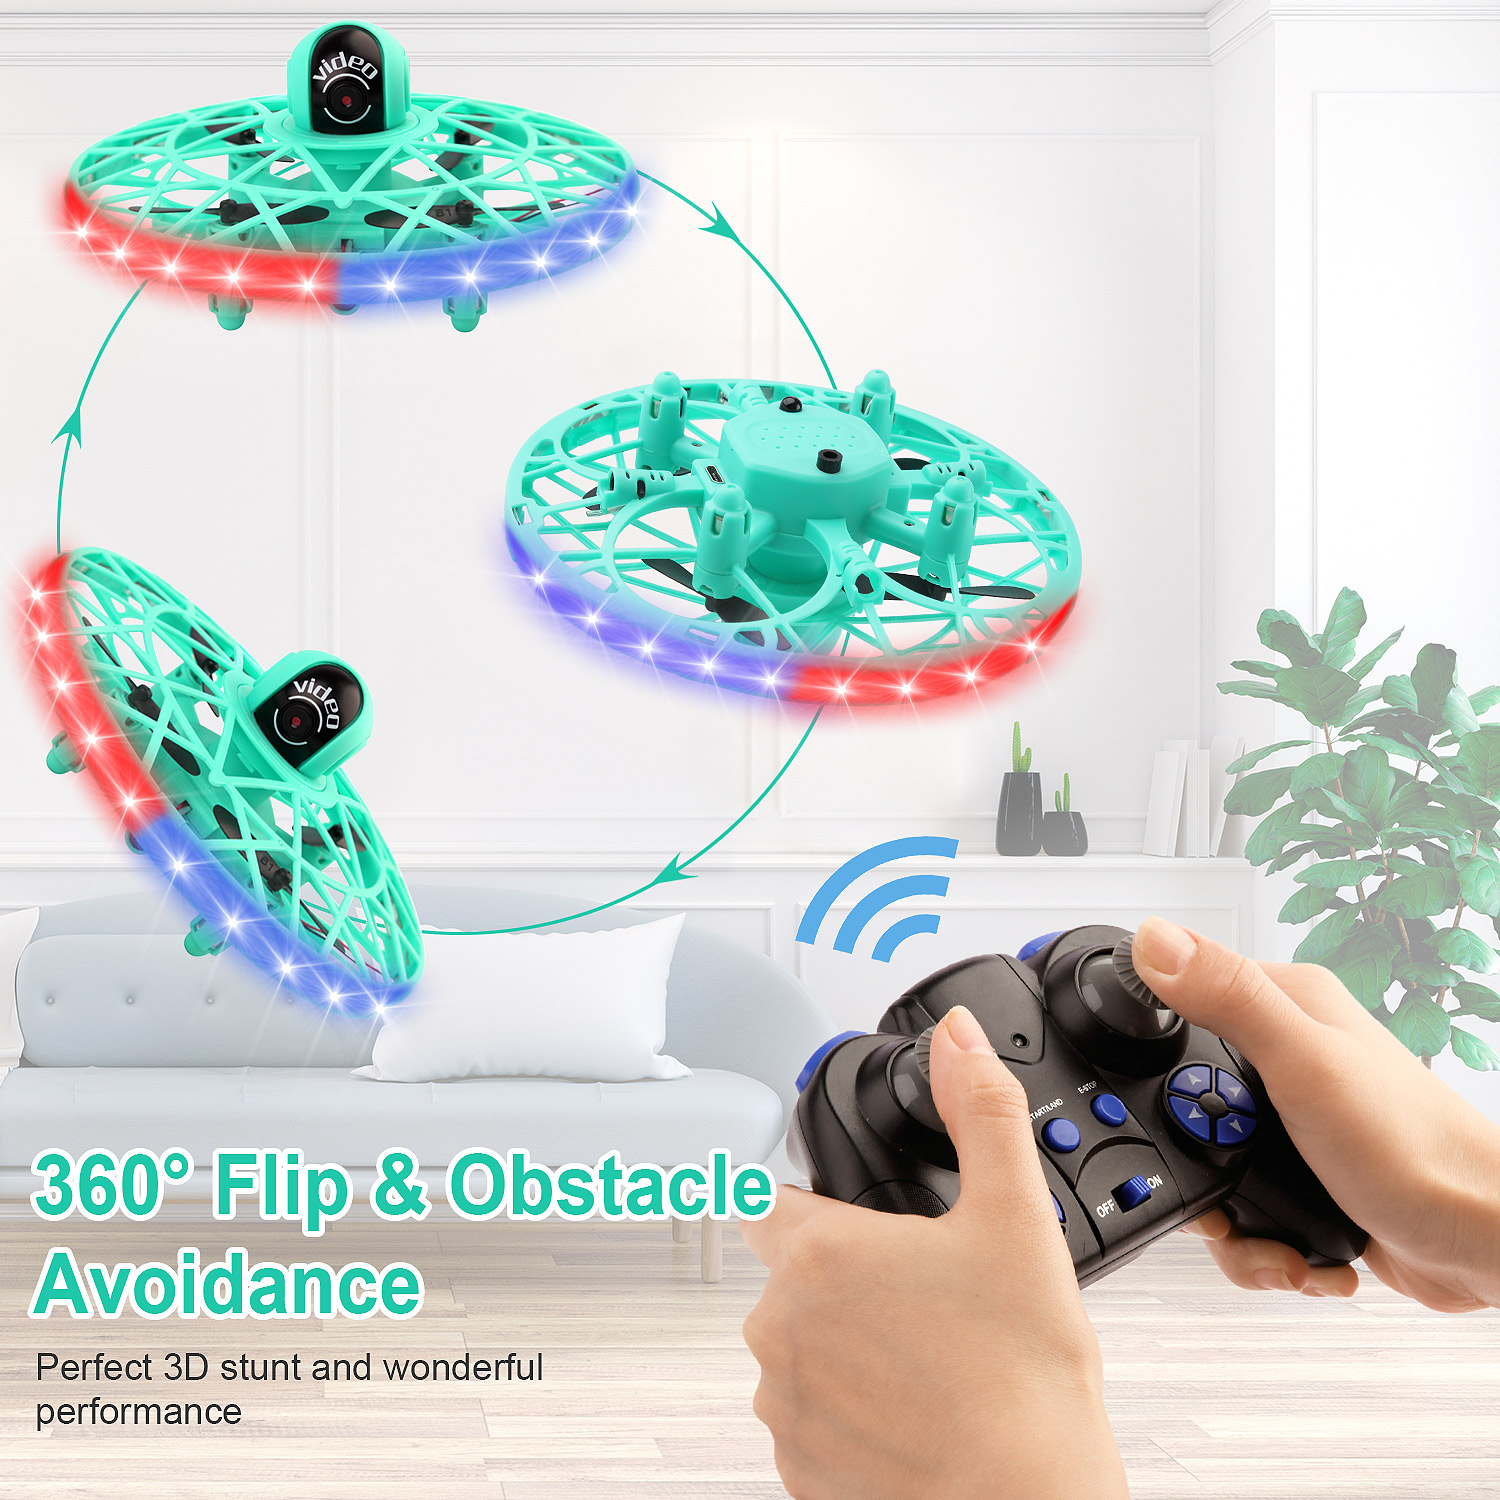 JJRC-F26-F26W-WiFi-FPV-with-720P-HD-Camera-Gesture-Inducing-Sensing-Flying-Ball-24G-RC-Drone-Quadcop-1849524-4